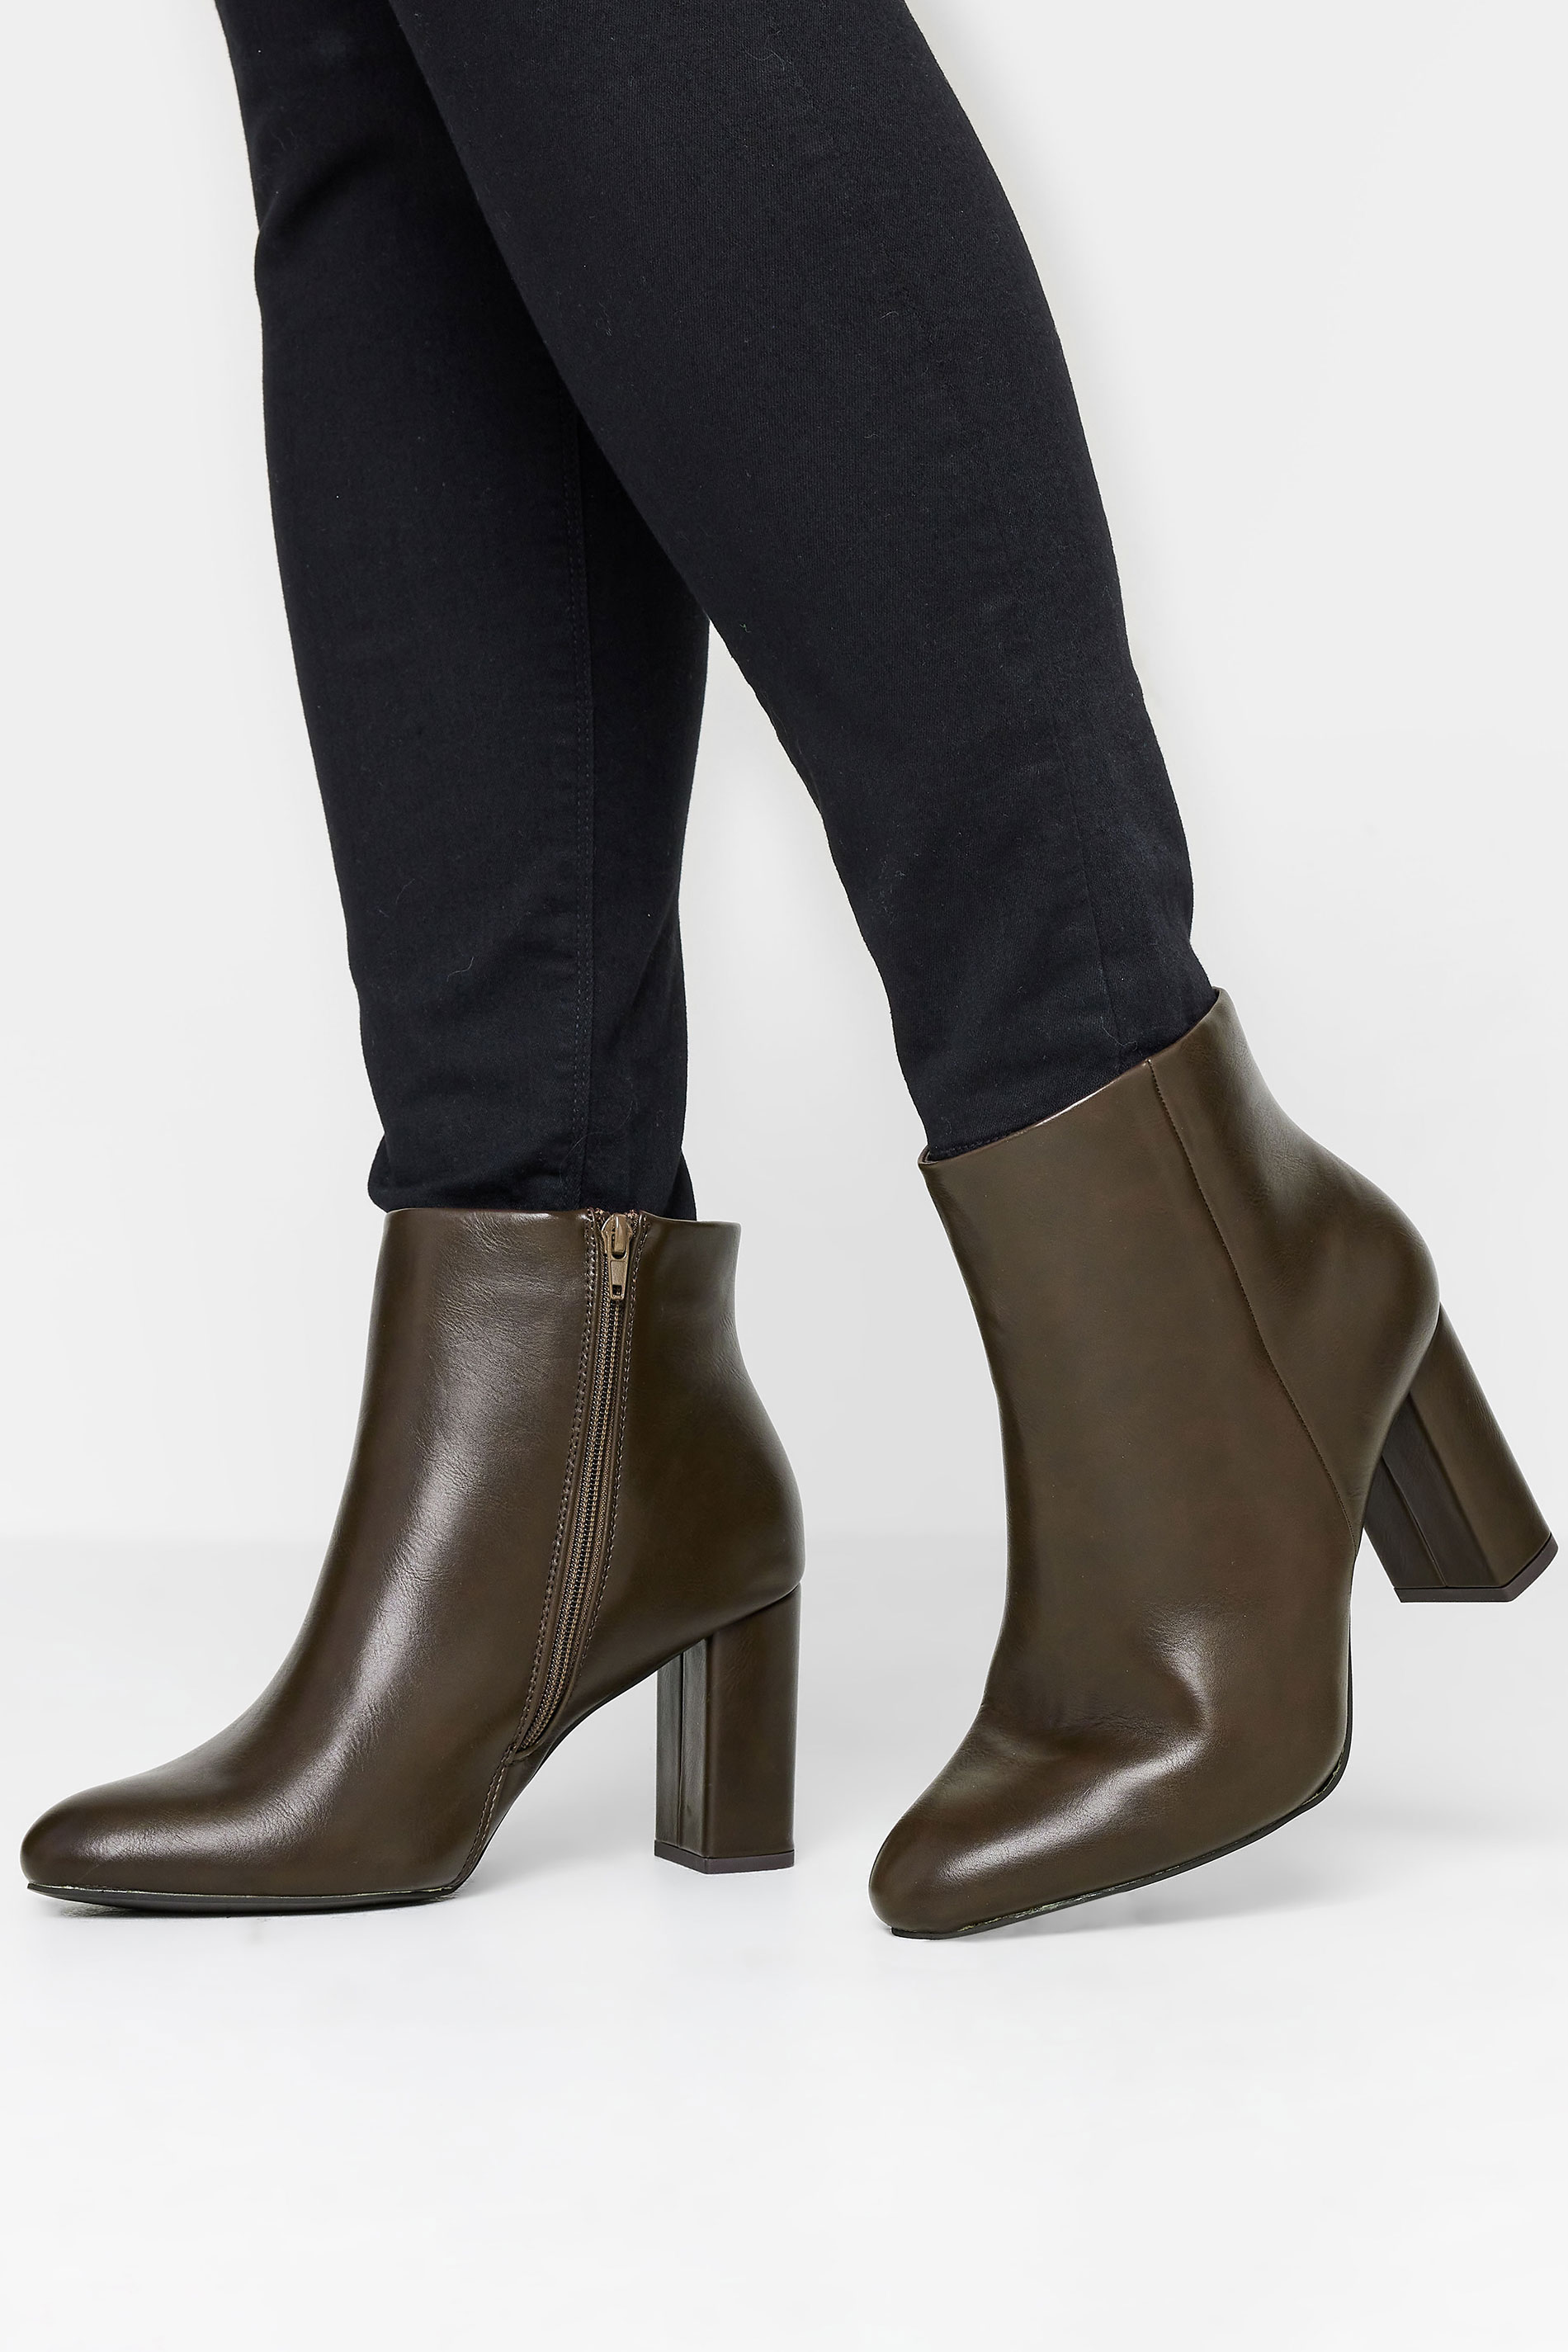 LIMITED COLLECTION Brown Heeled Ankle Boots In Extra Wide EEE Fit | Yours Clothing  1